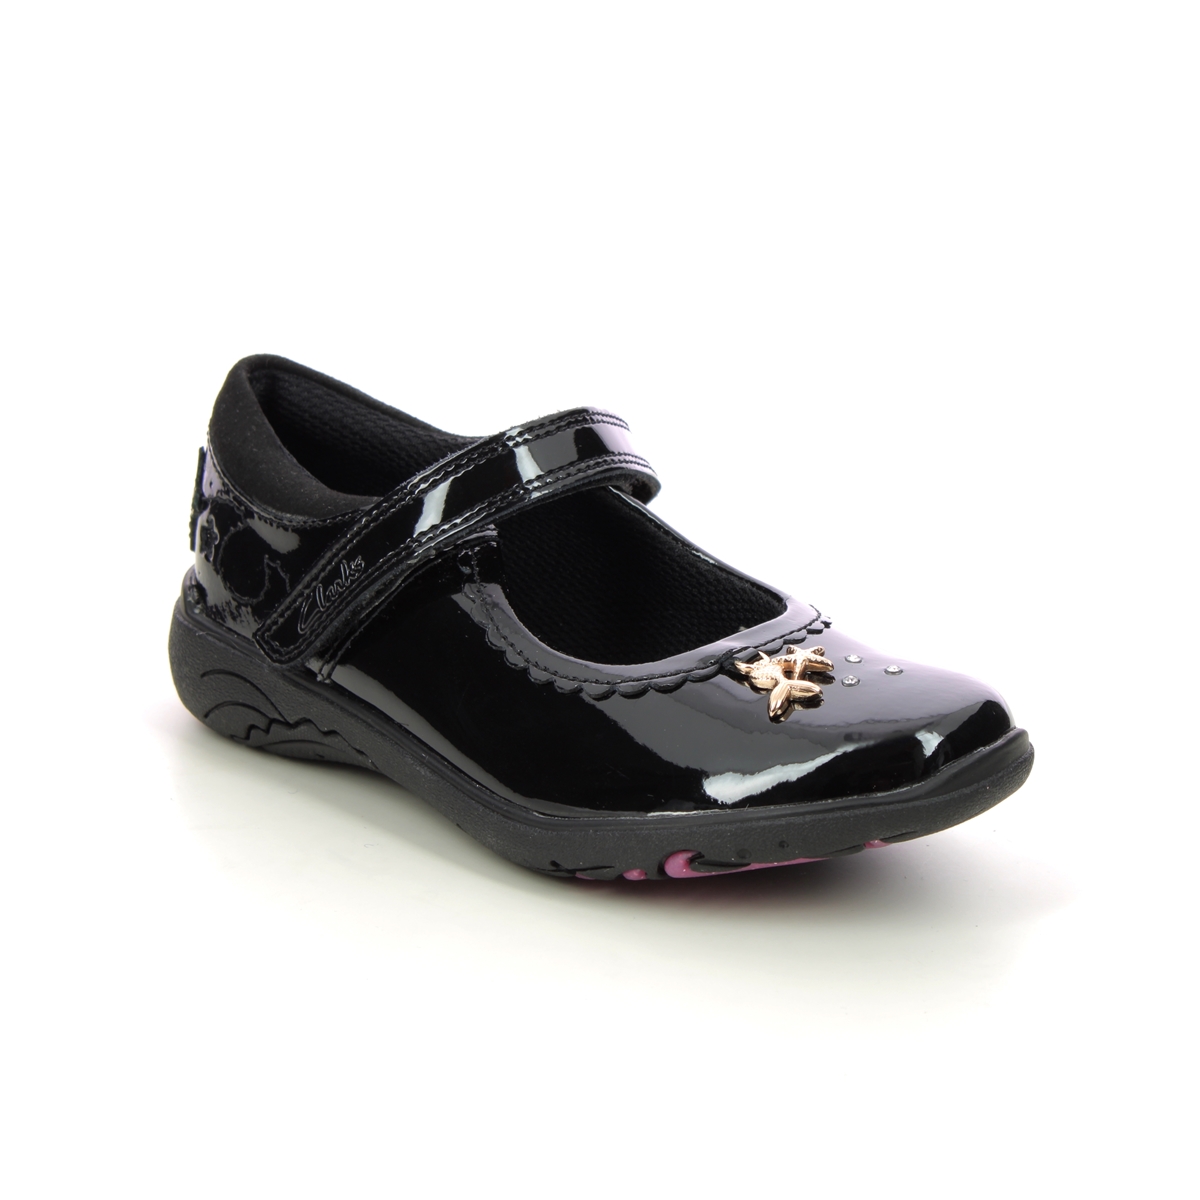 Clarks Relda Sea K Mary Jane Black patent Kids girls school shoes 7224-18H in a Plain Leather in Size 2.5